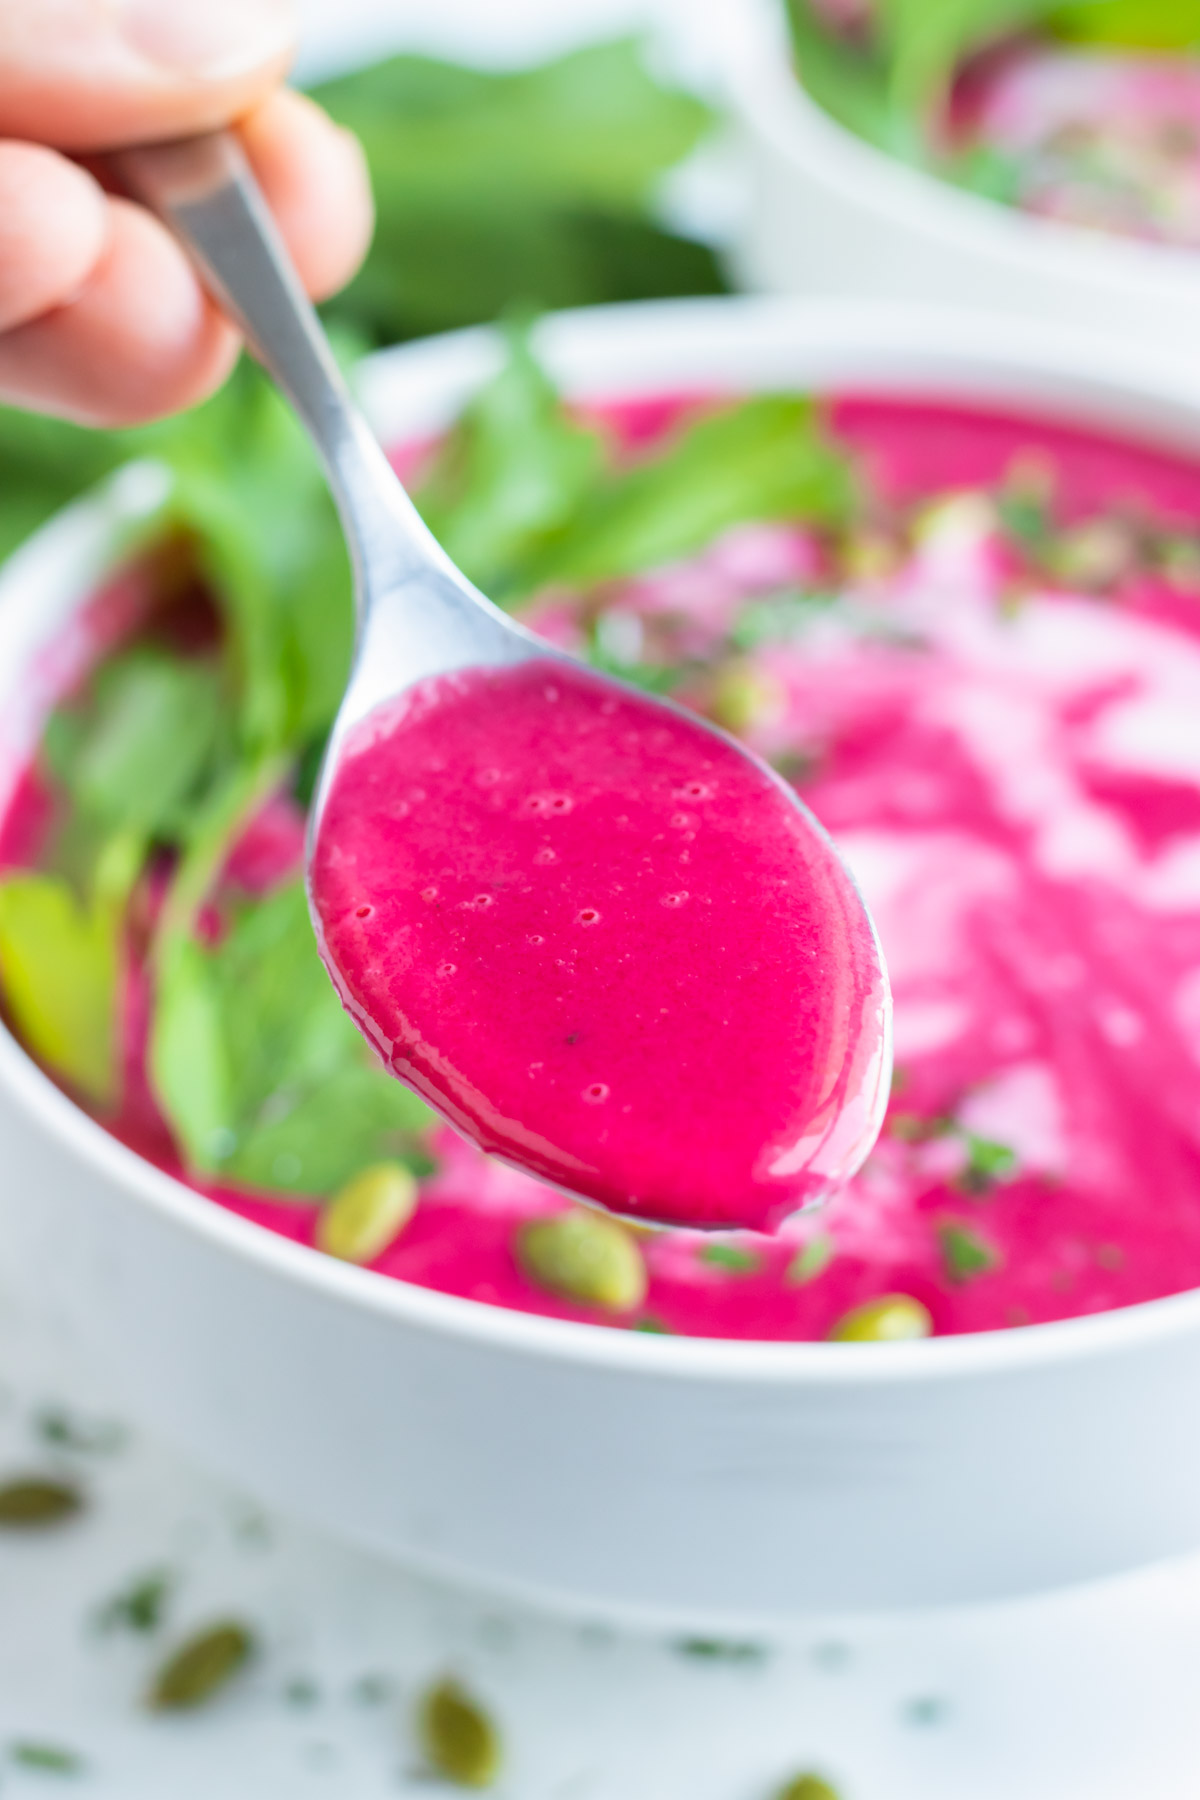 Beet soup has a bright color and creamy texture.